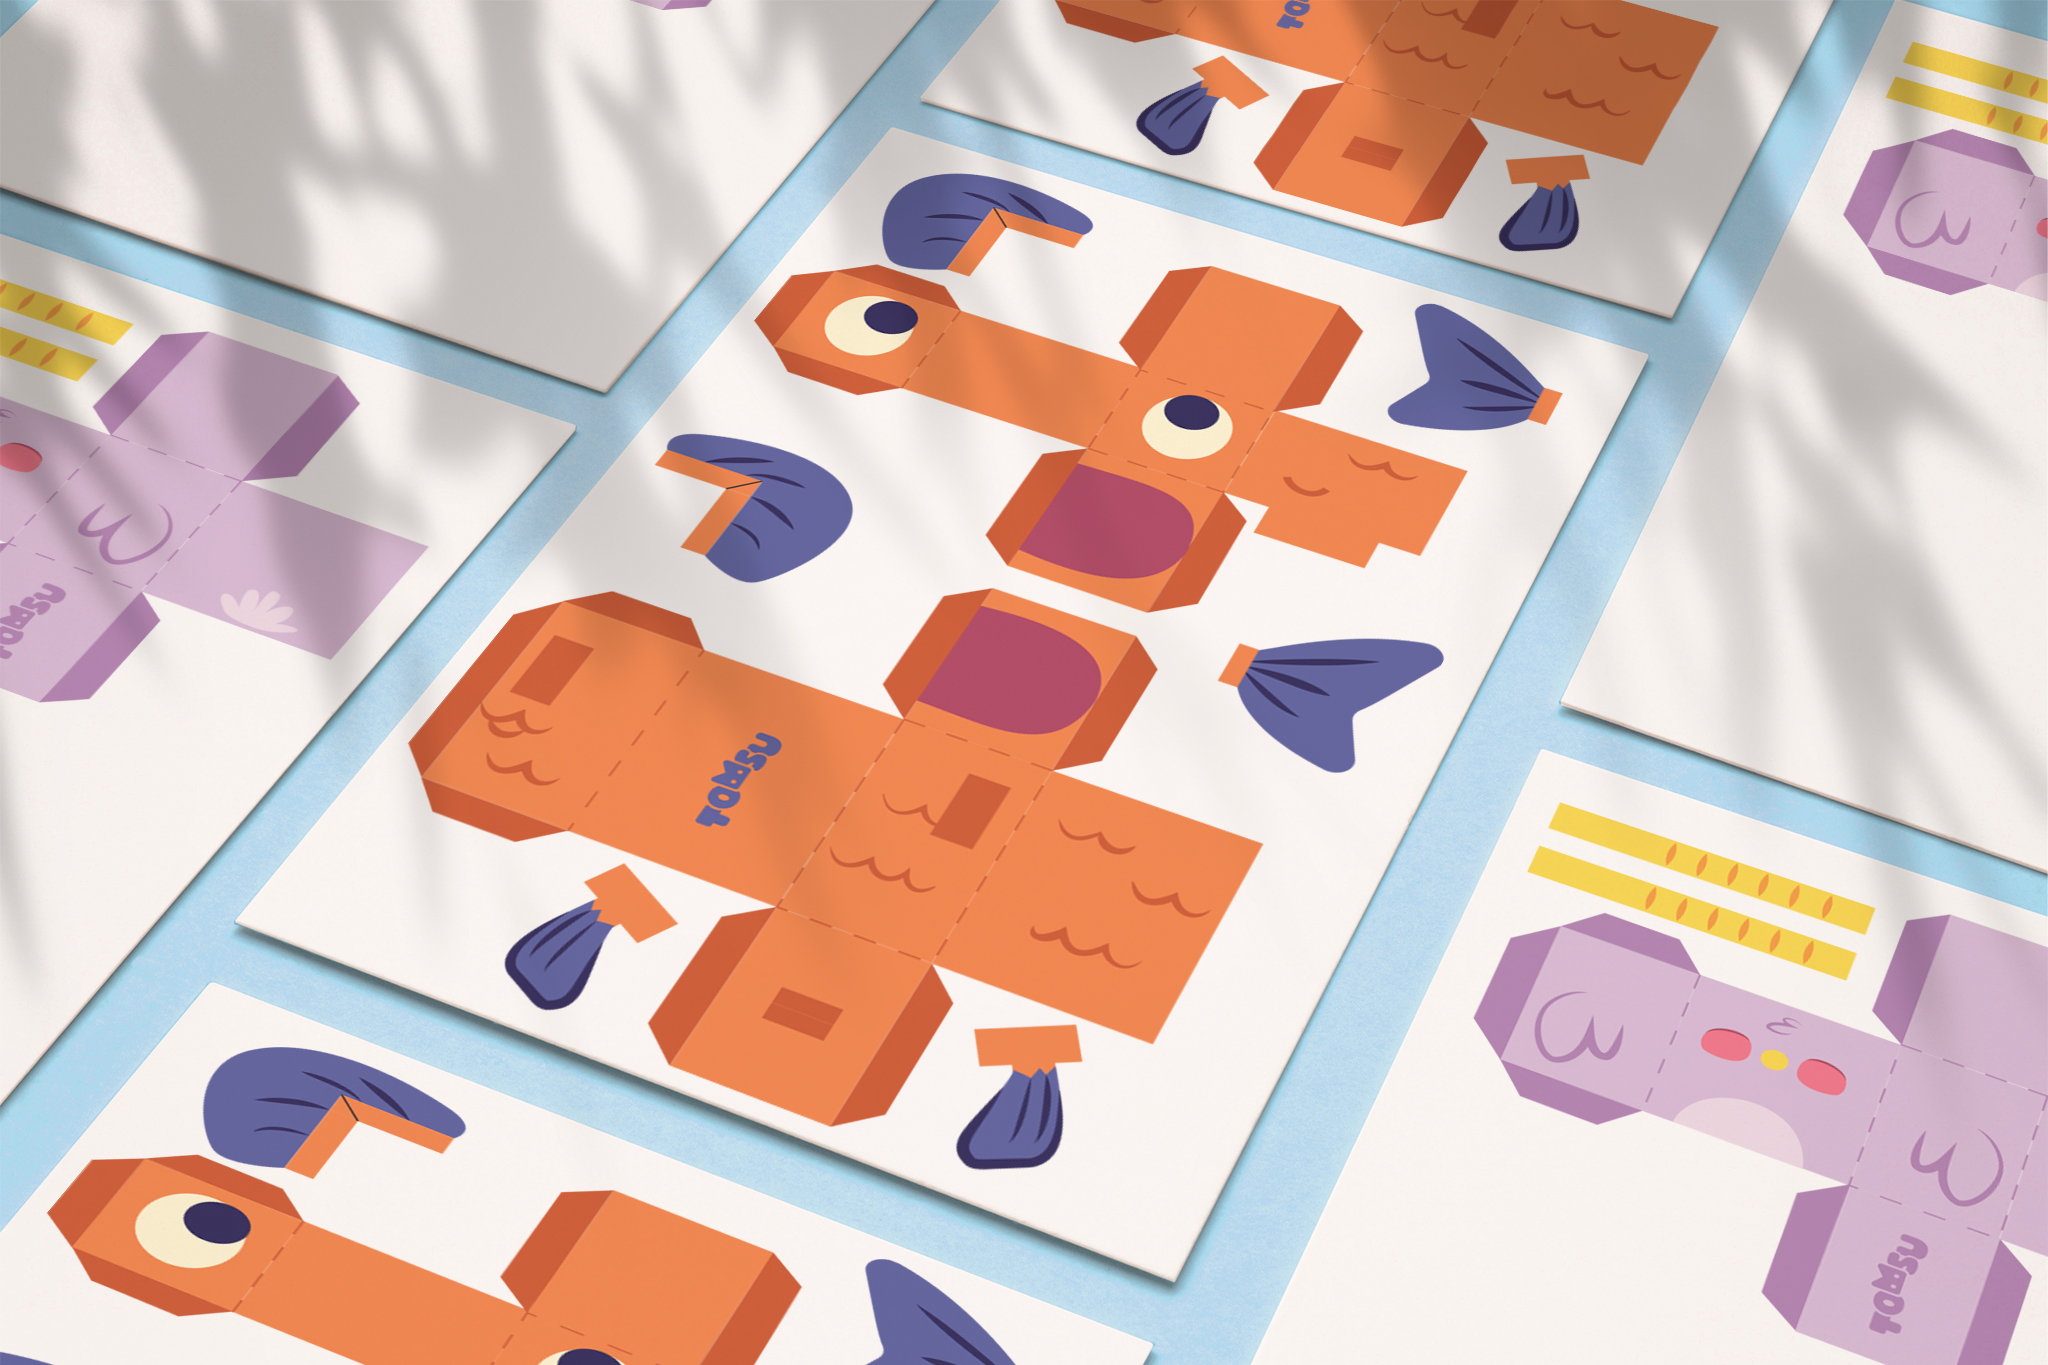 Mockup of the cut-outs of the paper toys